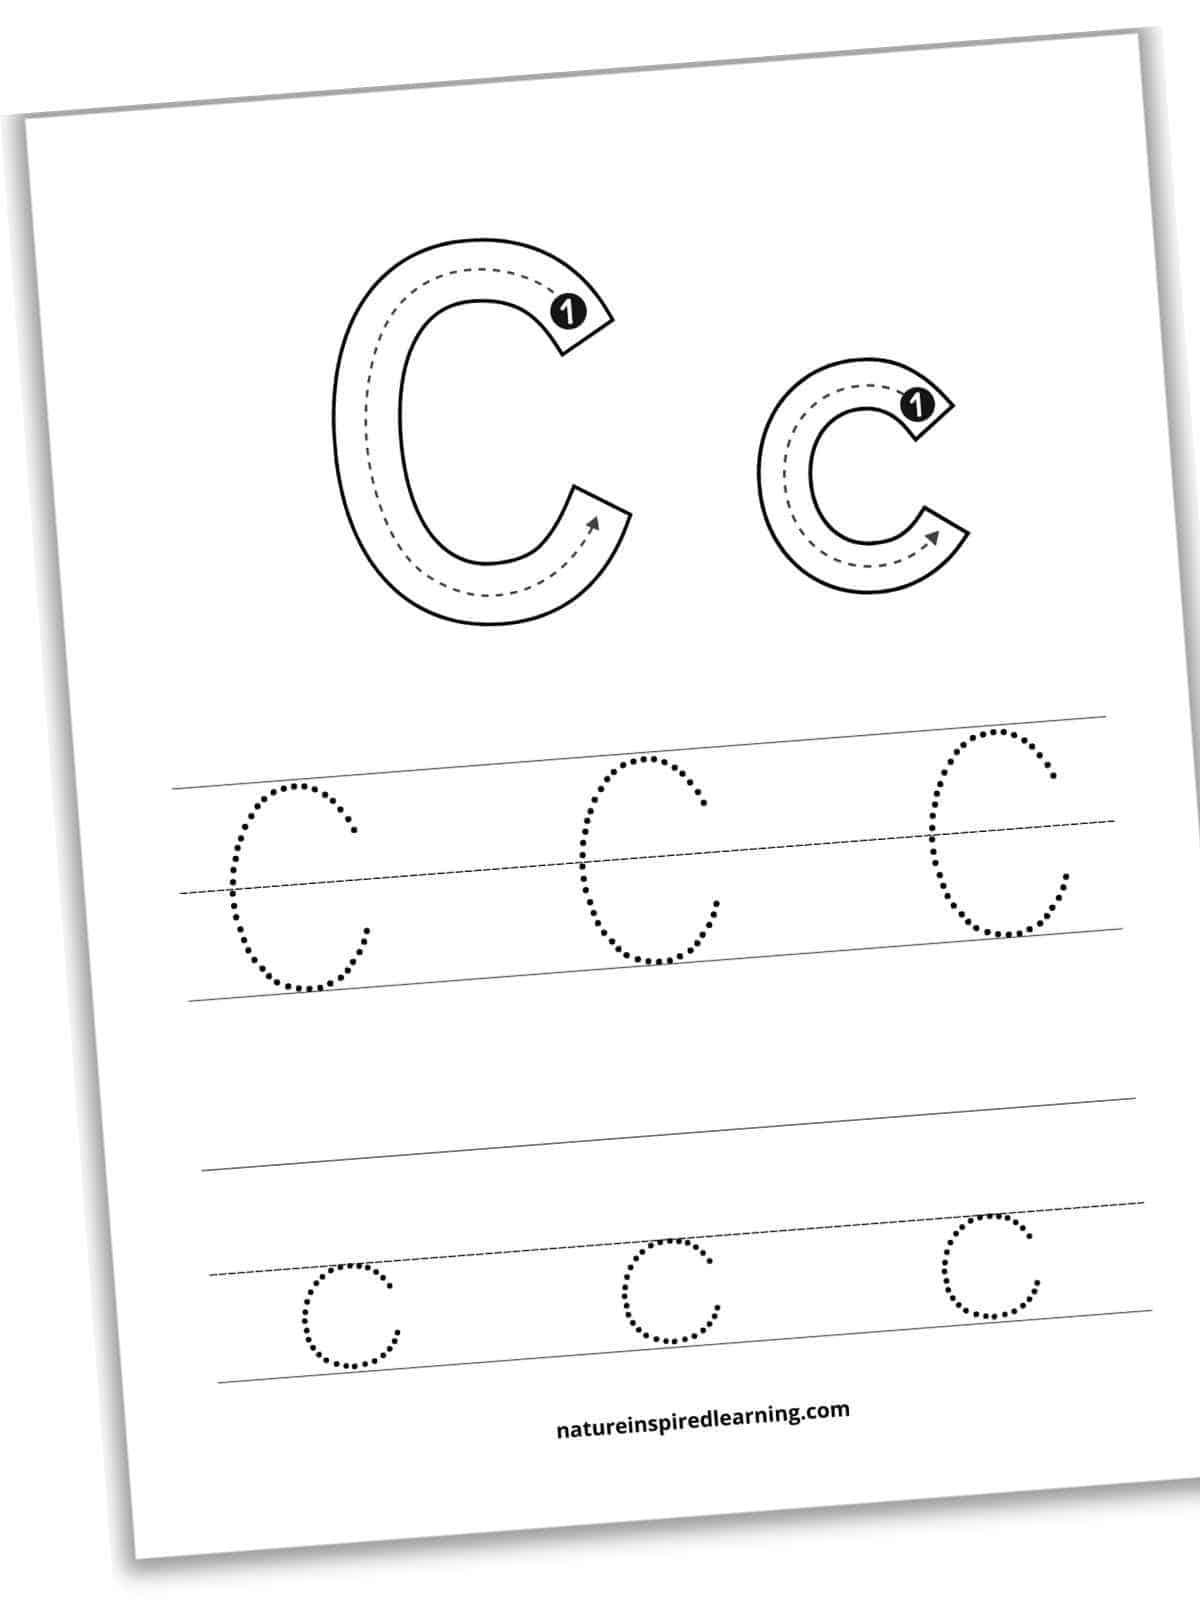 black and white worksheet with large letter C in capital and lowercase with number and arrow guides across the top. Two rows of tracable letters below one with three uppercase letters and one with three lowercase letters. Printable with a drop shadow slanted.